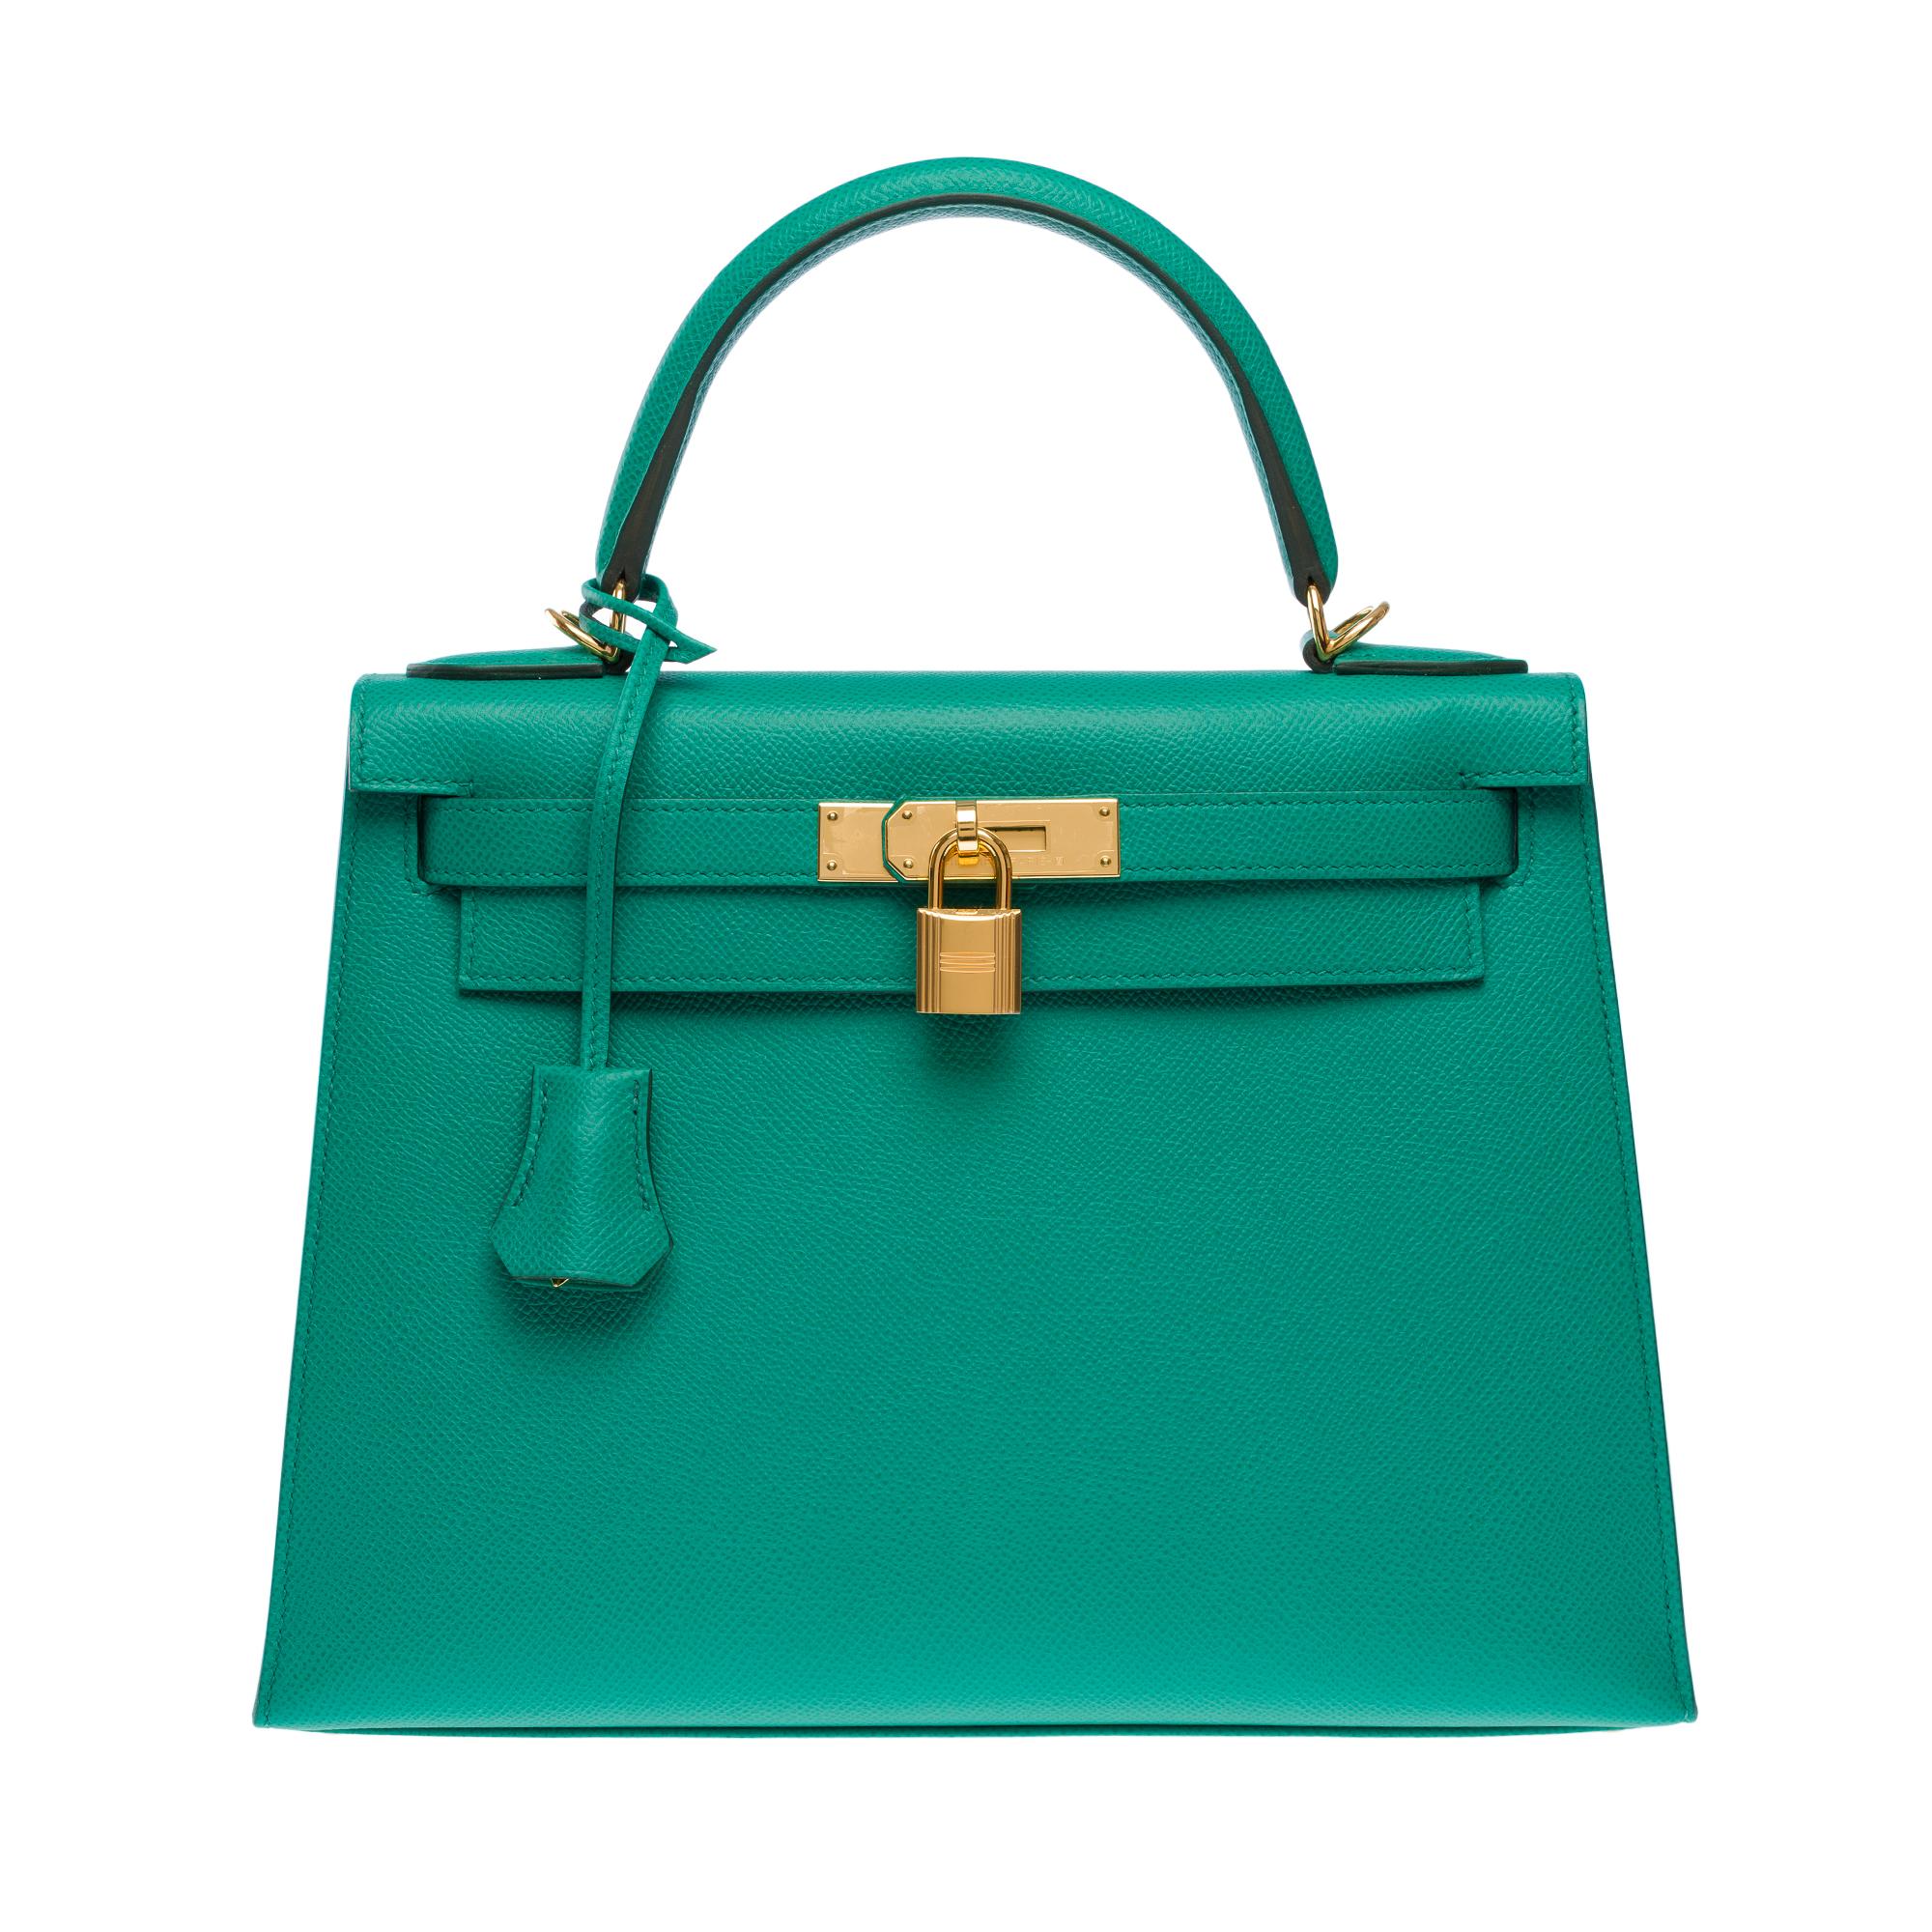 New Hermès Kelly 28 sellier handbag strap in Vert Jade Epsom leather, GHW In New Condition For Sale In Paris, IDF